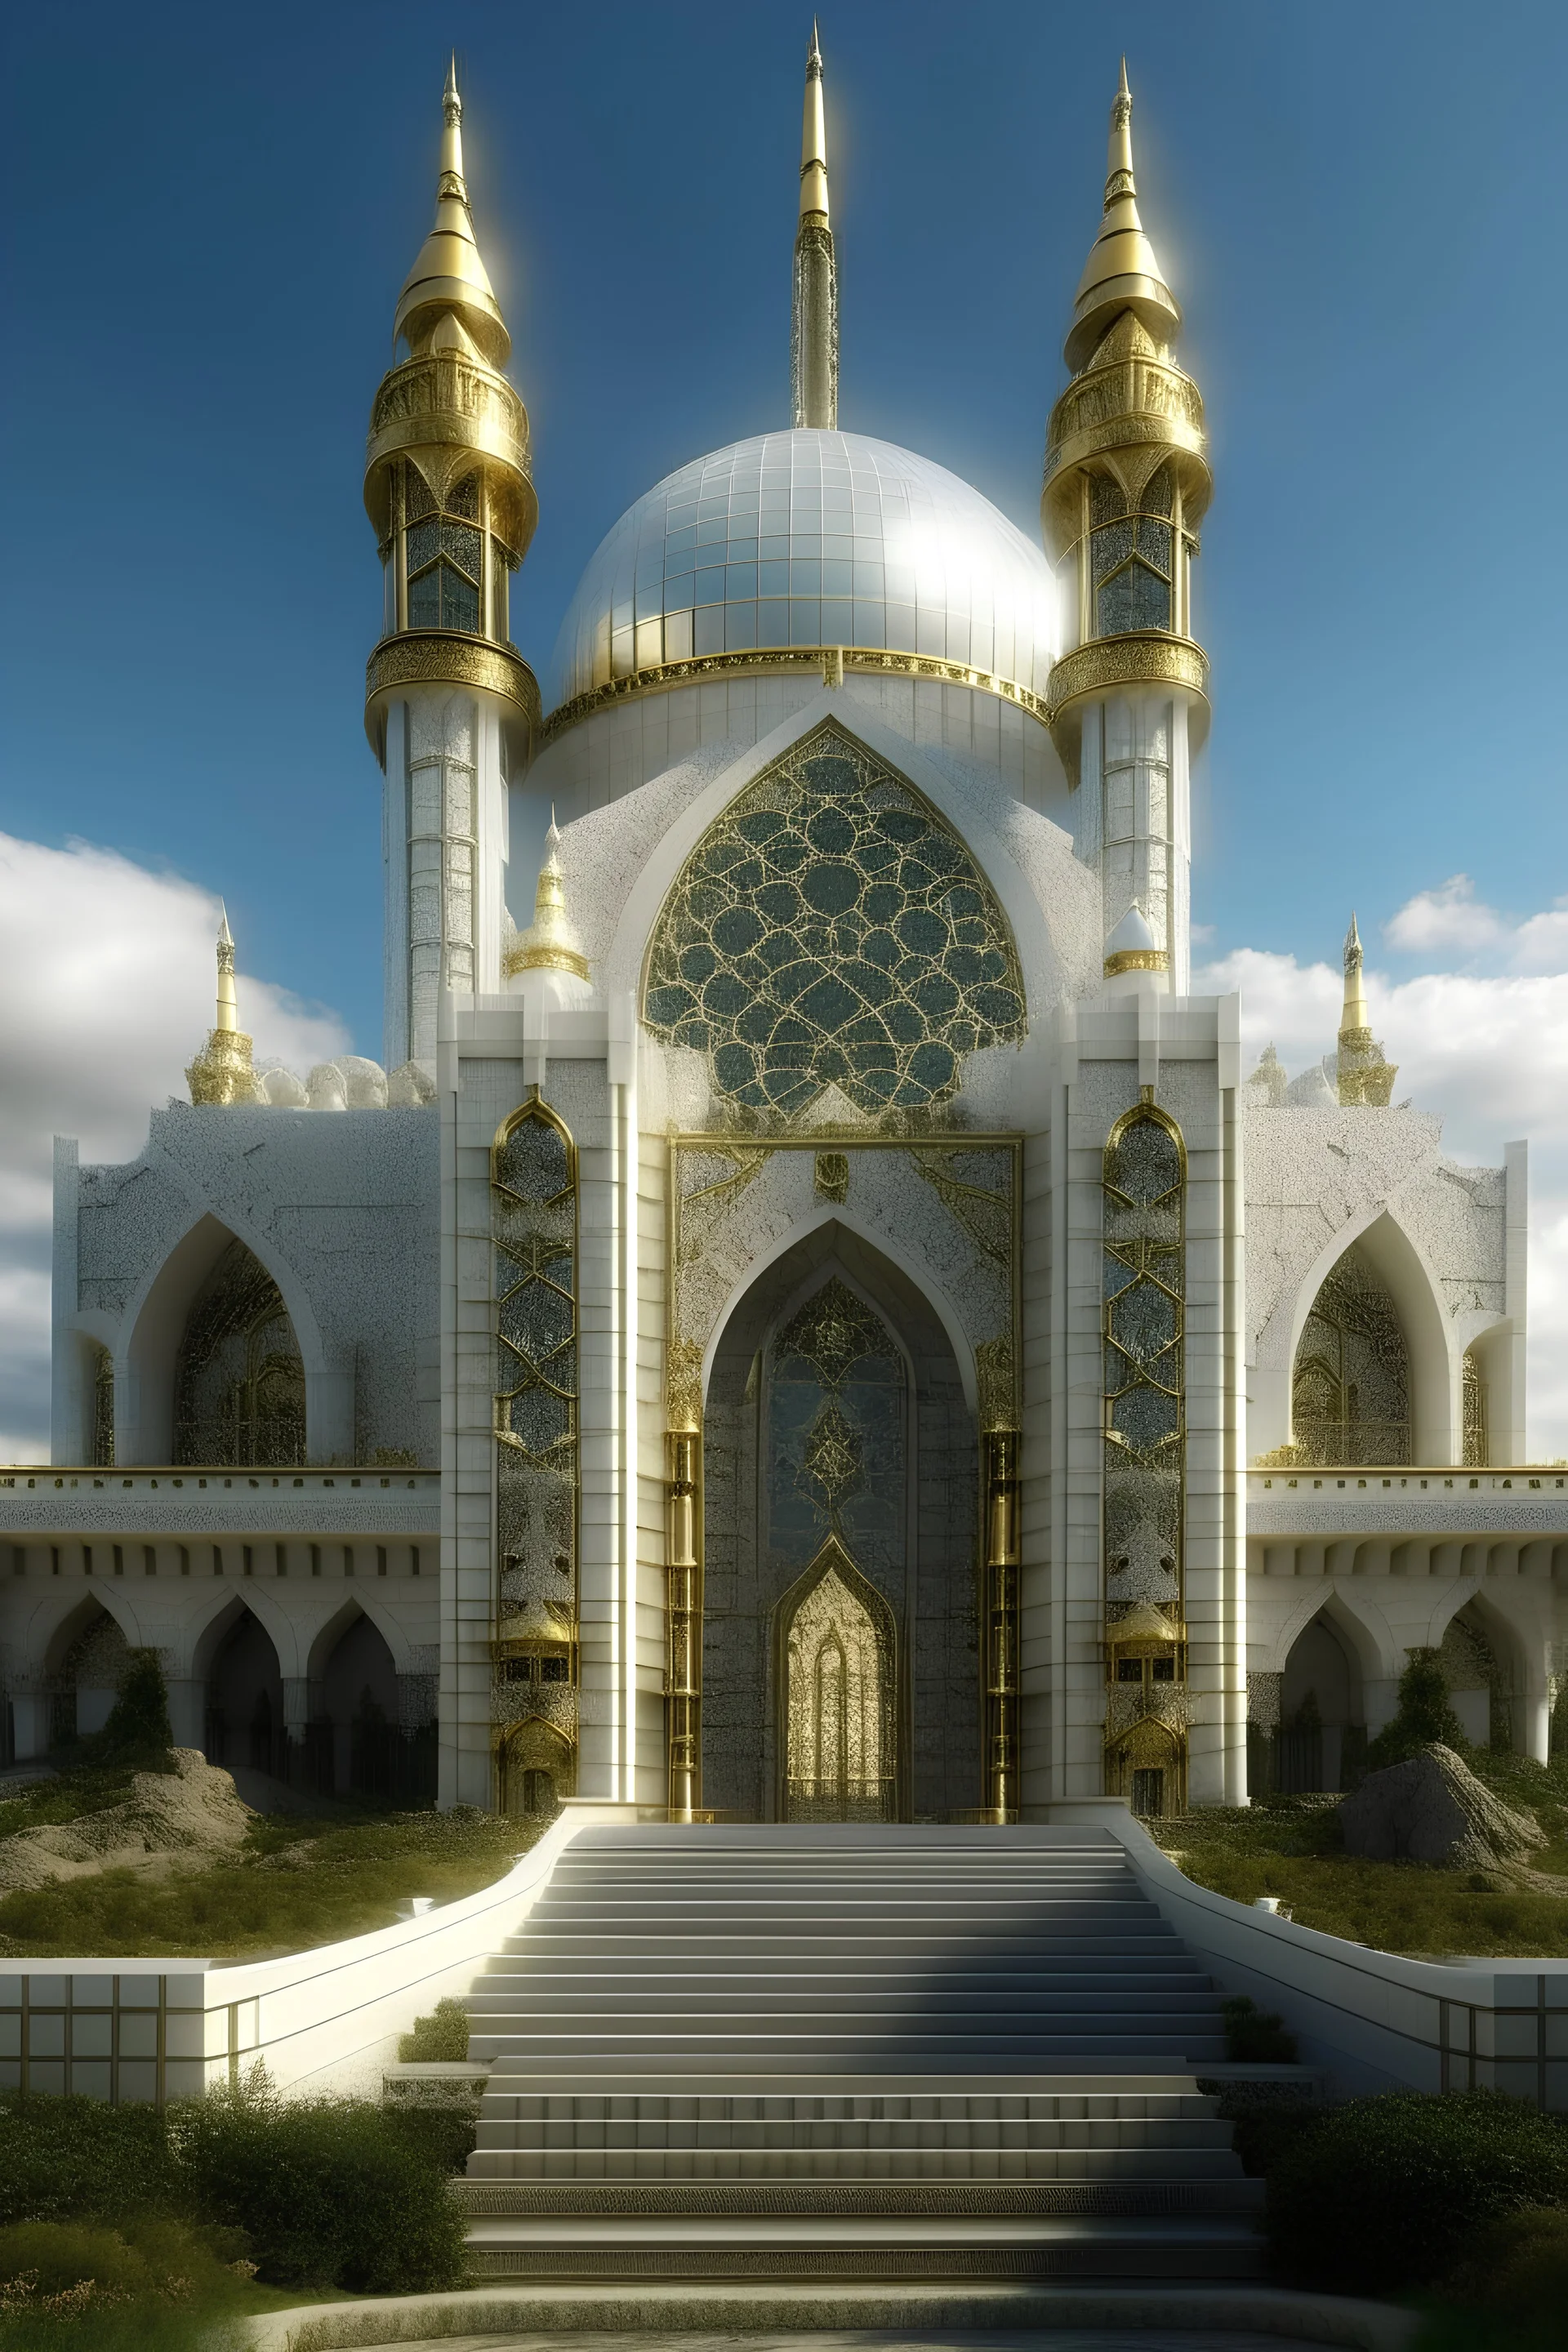 The Holy House in meeca in future